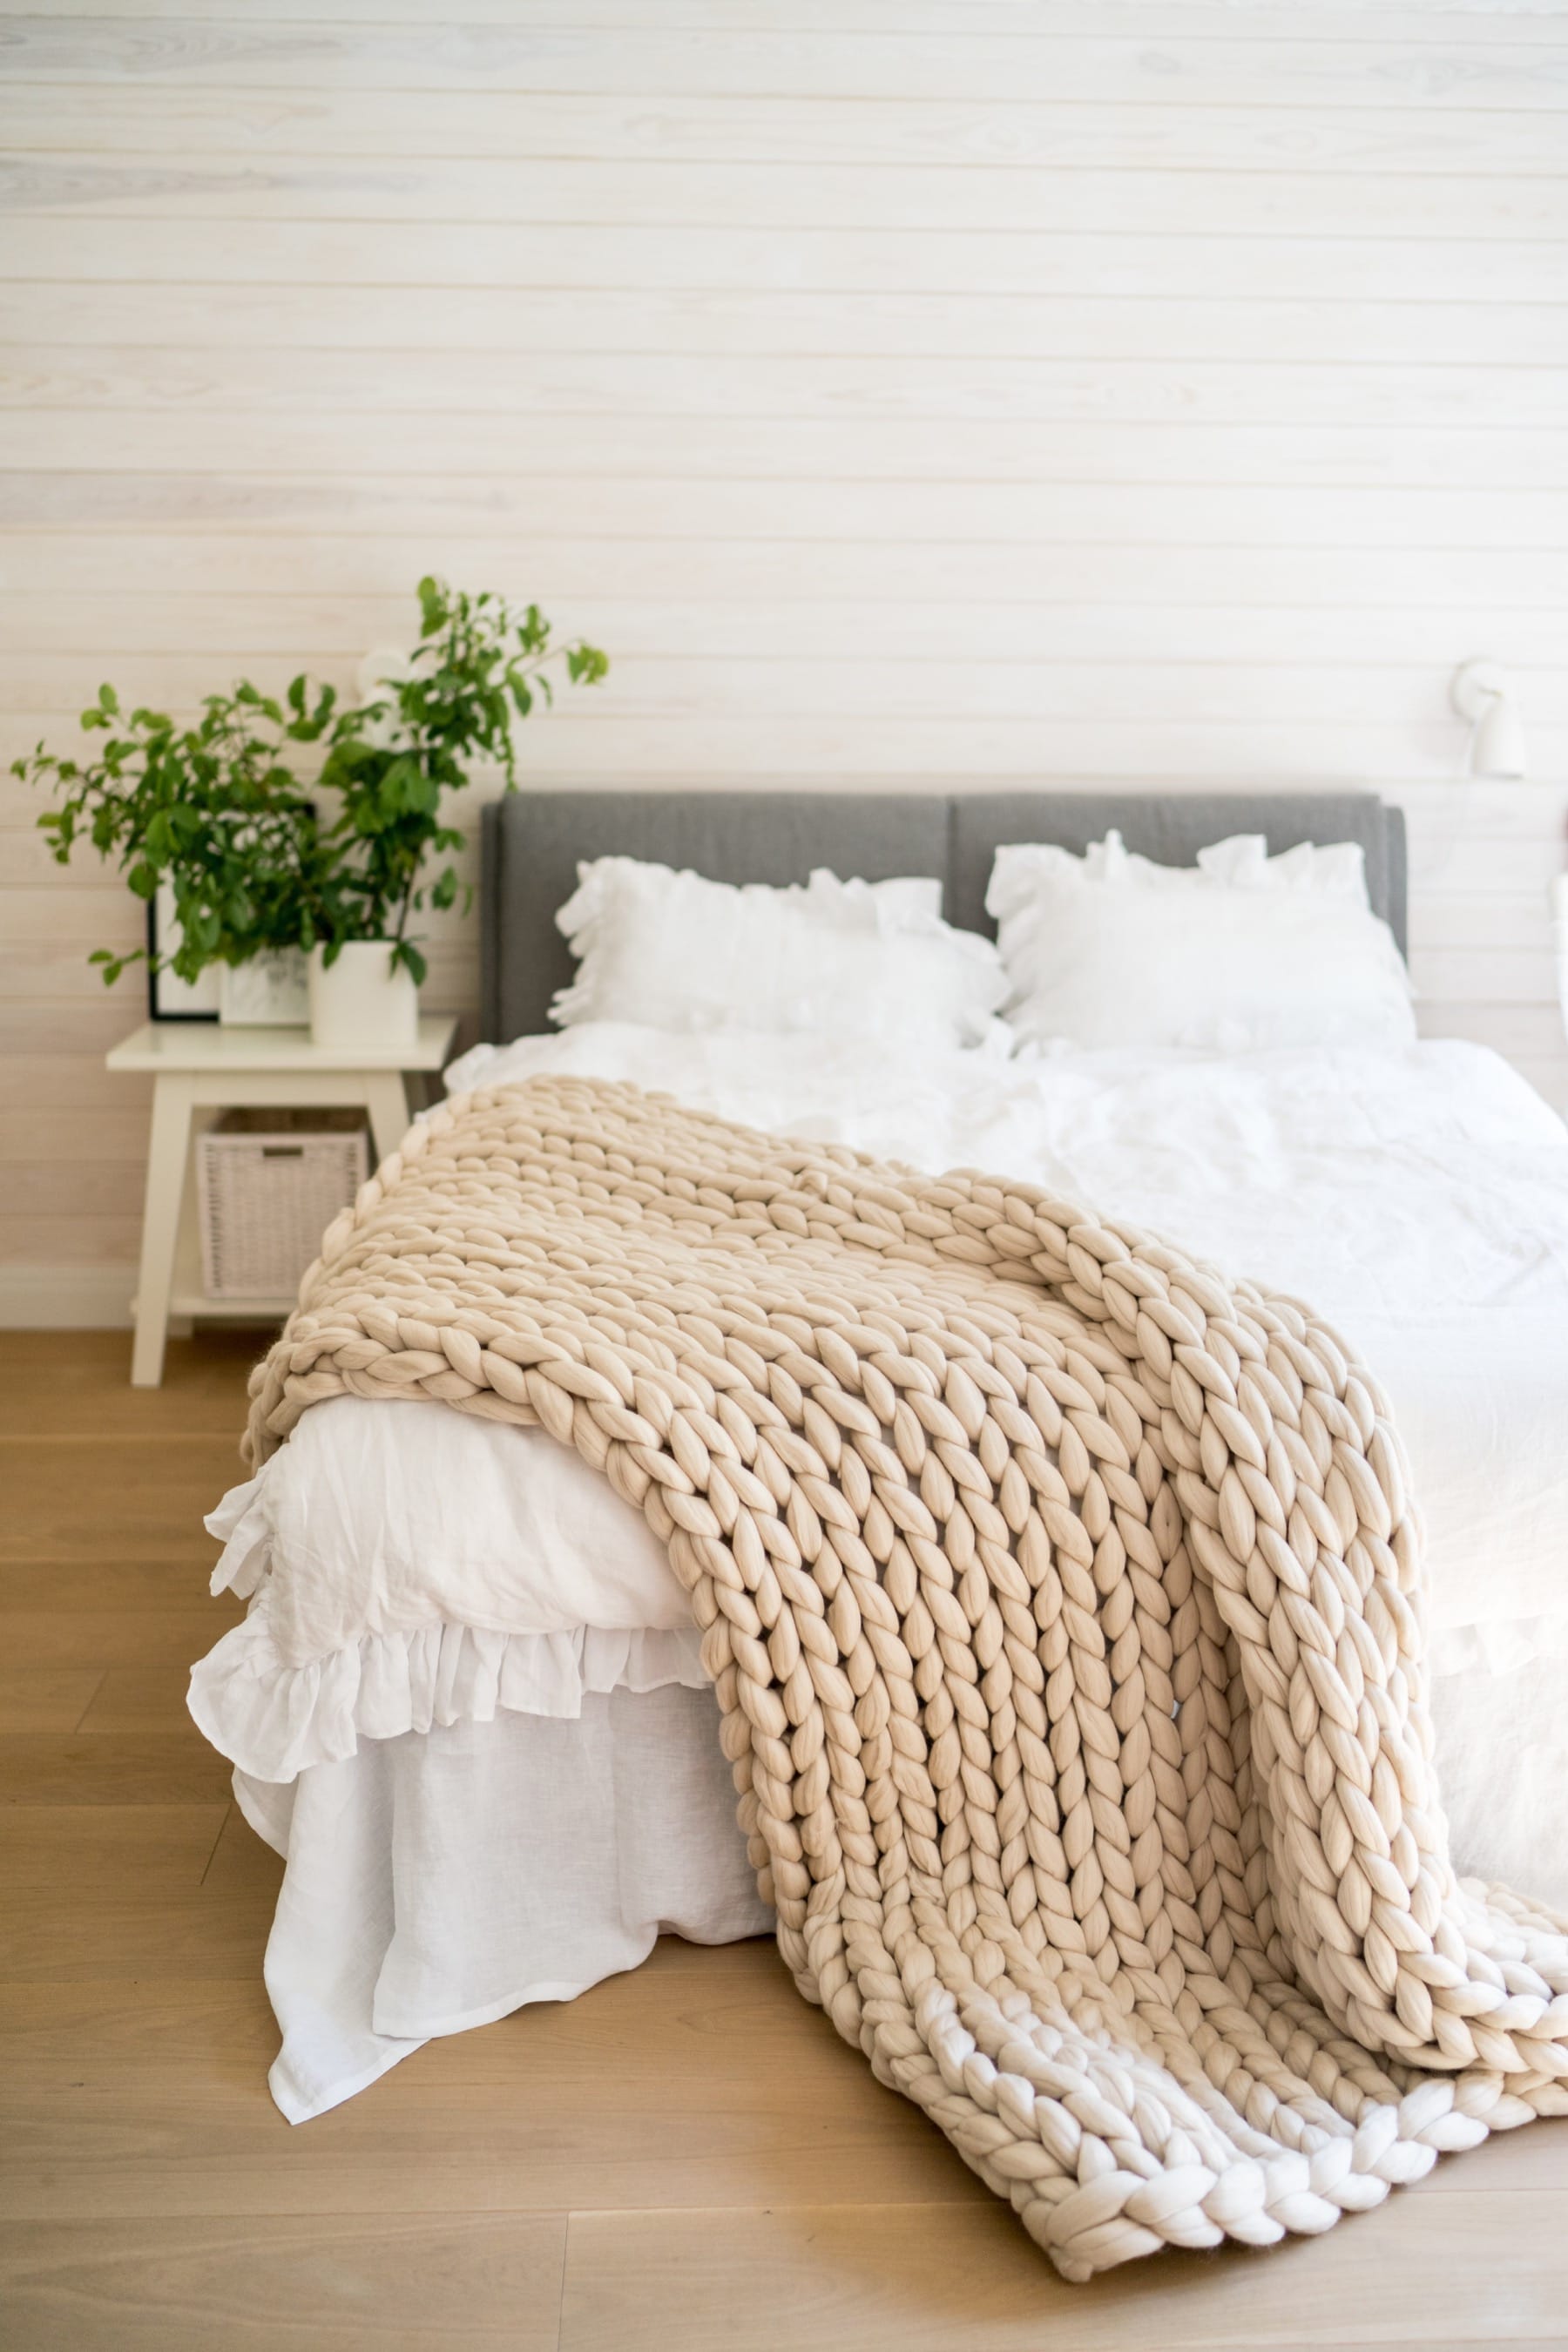 chunky knit blanket on ruffle bedding